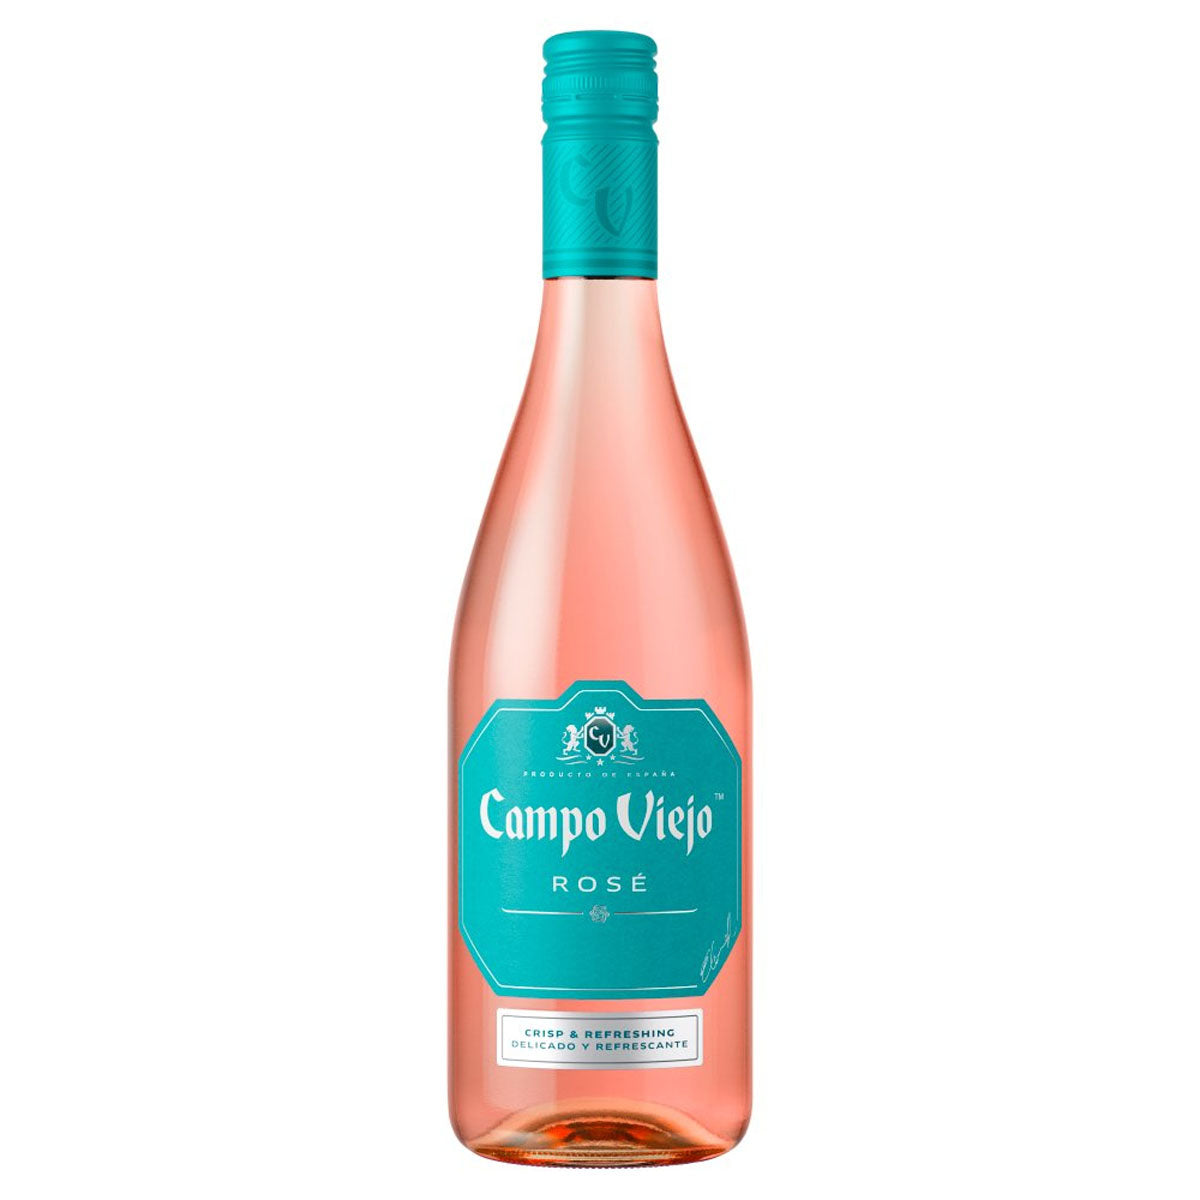 A bottle of Campo Viejo - Rose (13.5% ABV) - 750ml on a white background.